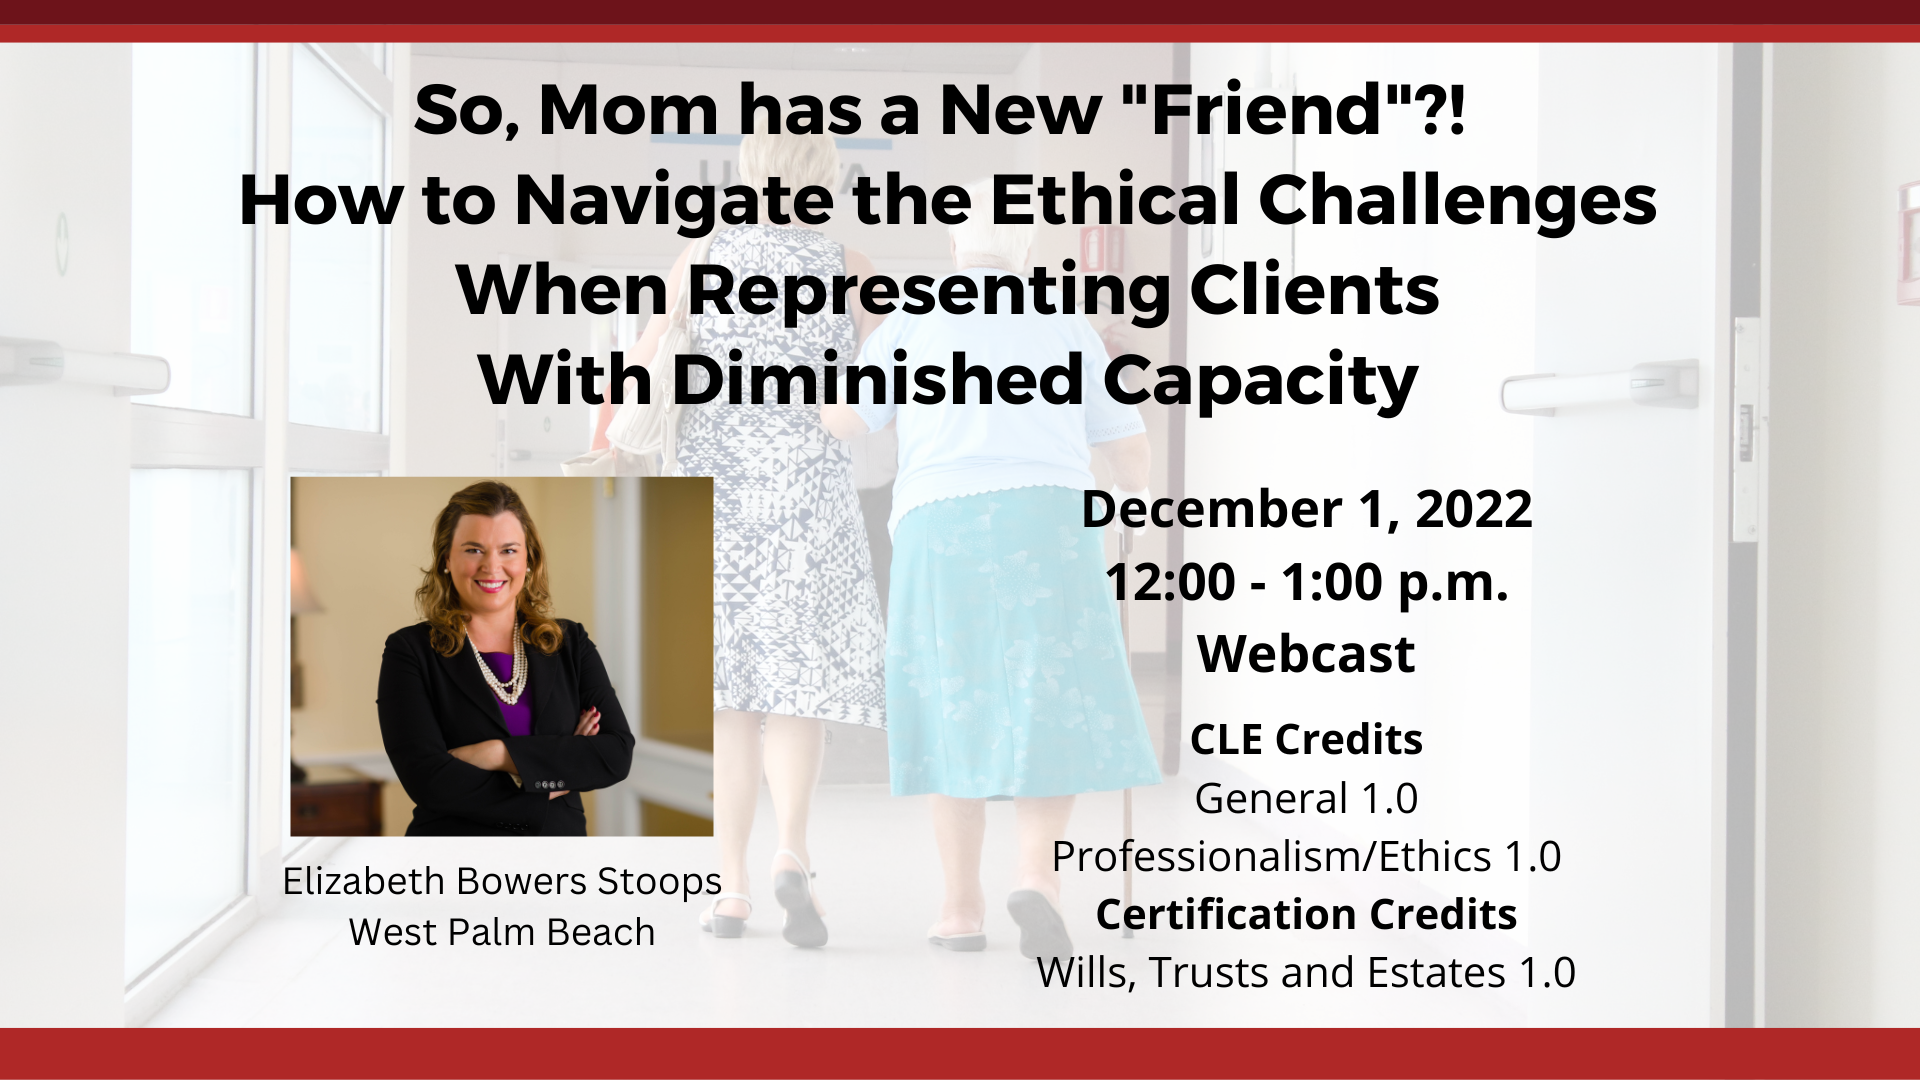 How to Navigate the Ethical Challenges When Representing Clients With Diminished Capacity